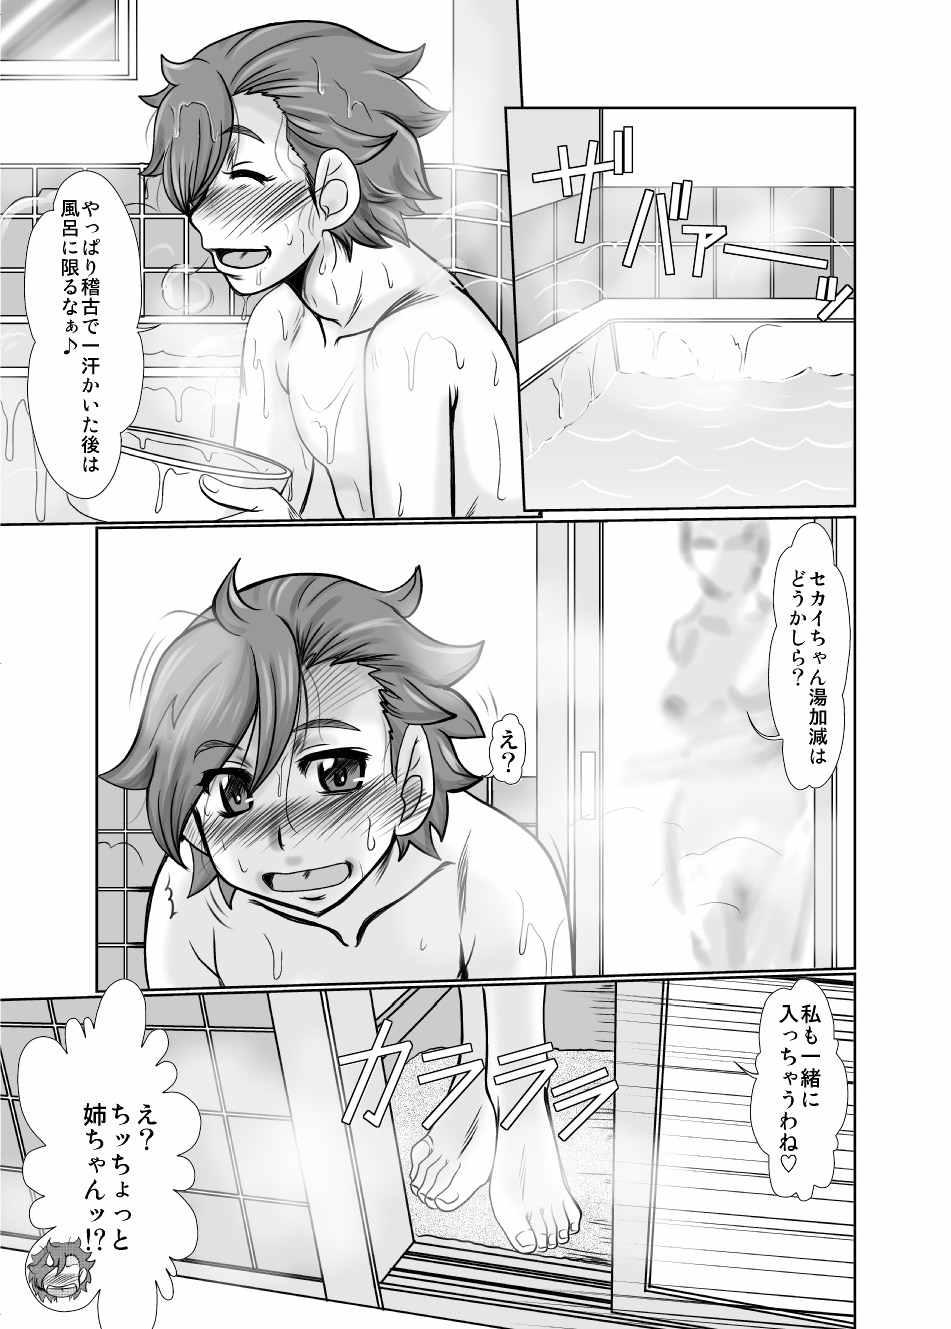 Strap On F-83 - Gundam build fighters try Gay Bukkakeboy - Page 9